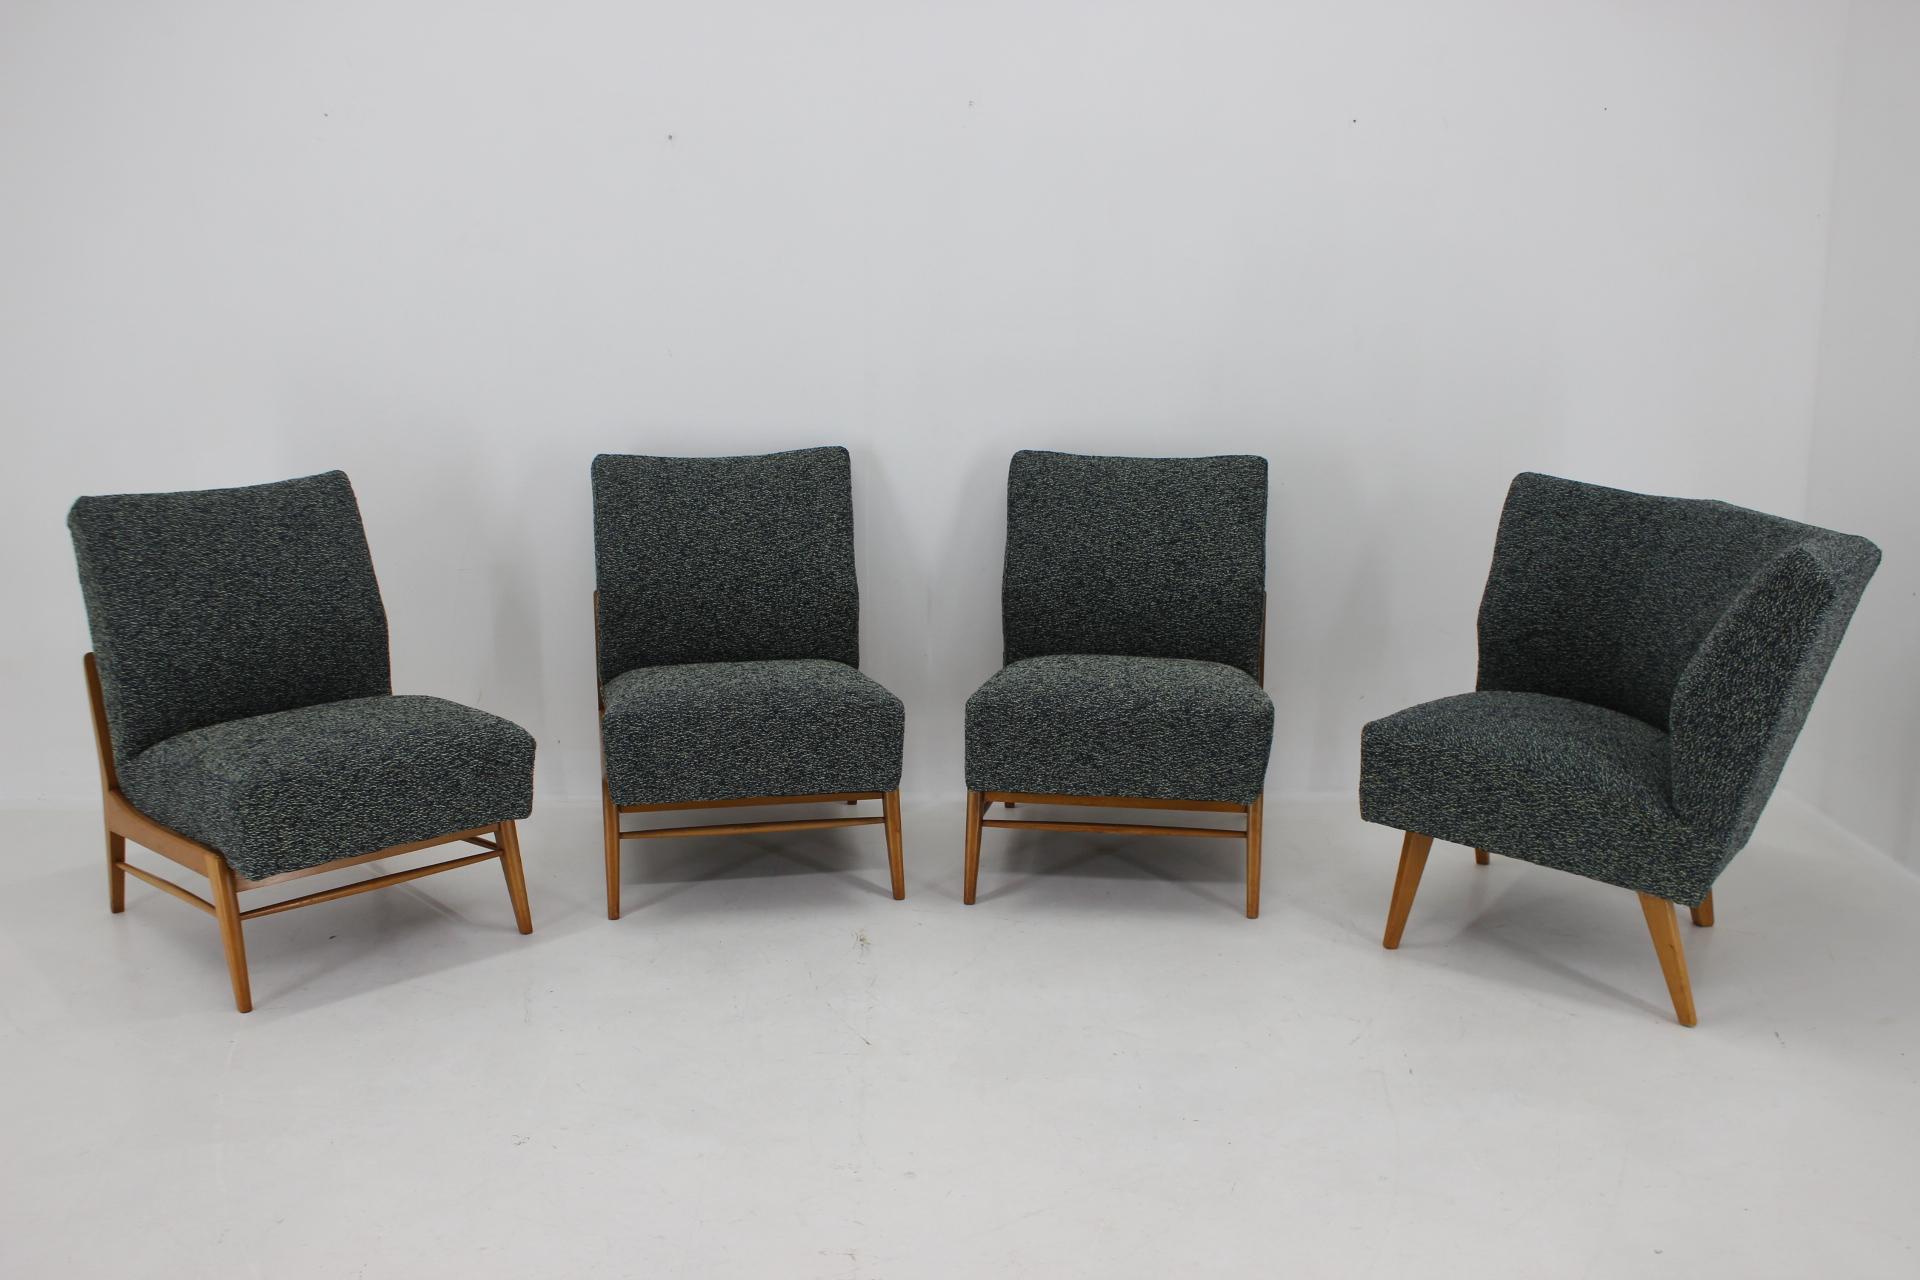 1970s Modular Sofa or Chairs in Beech wood and Kirgby Fabric, Czechoslovakia For Sale 2